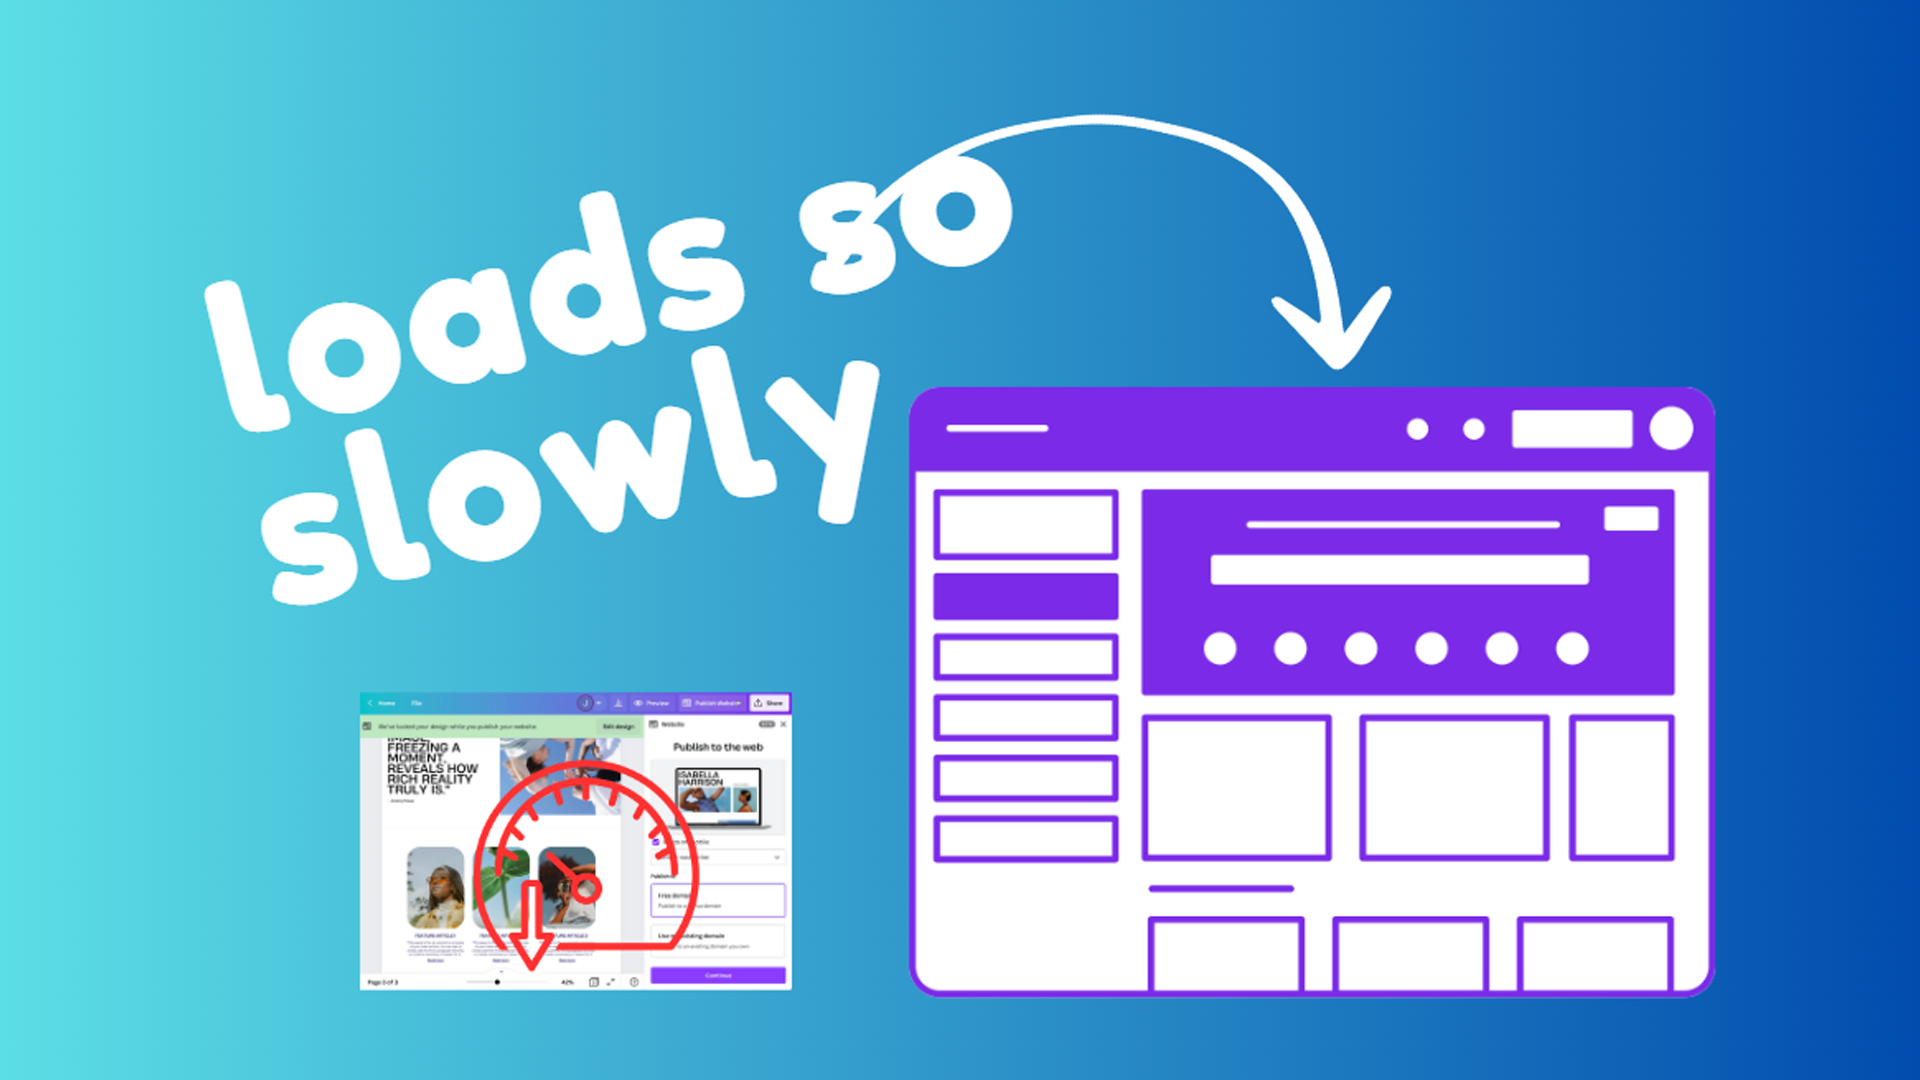 14 Solutions To Fix Canva That Loads So Slowly